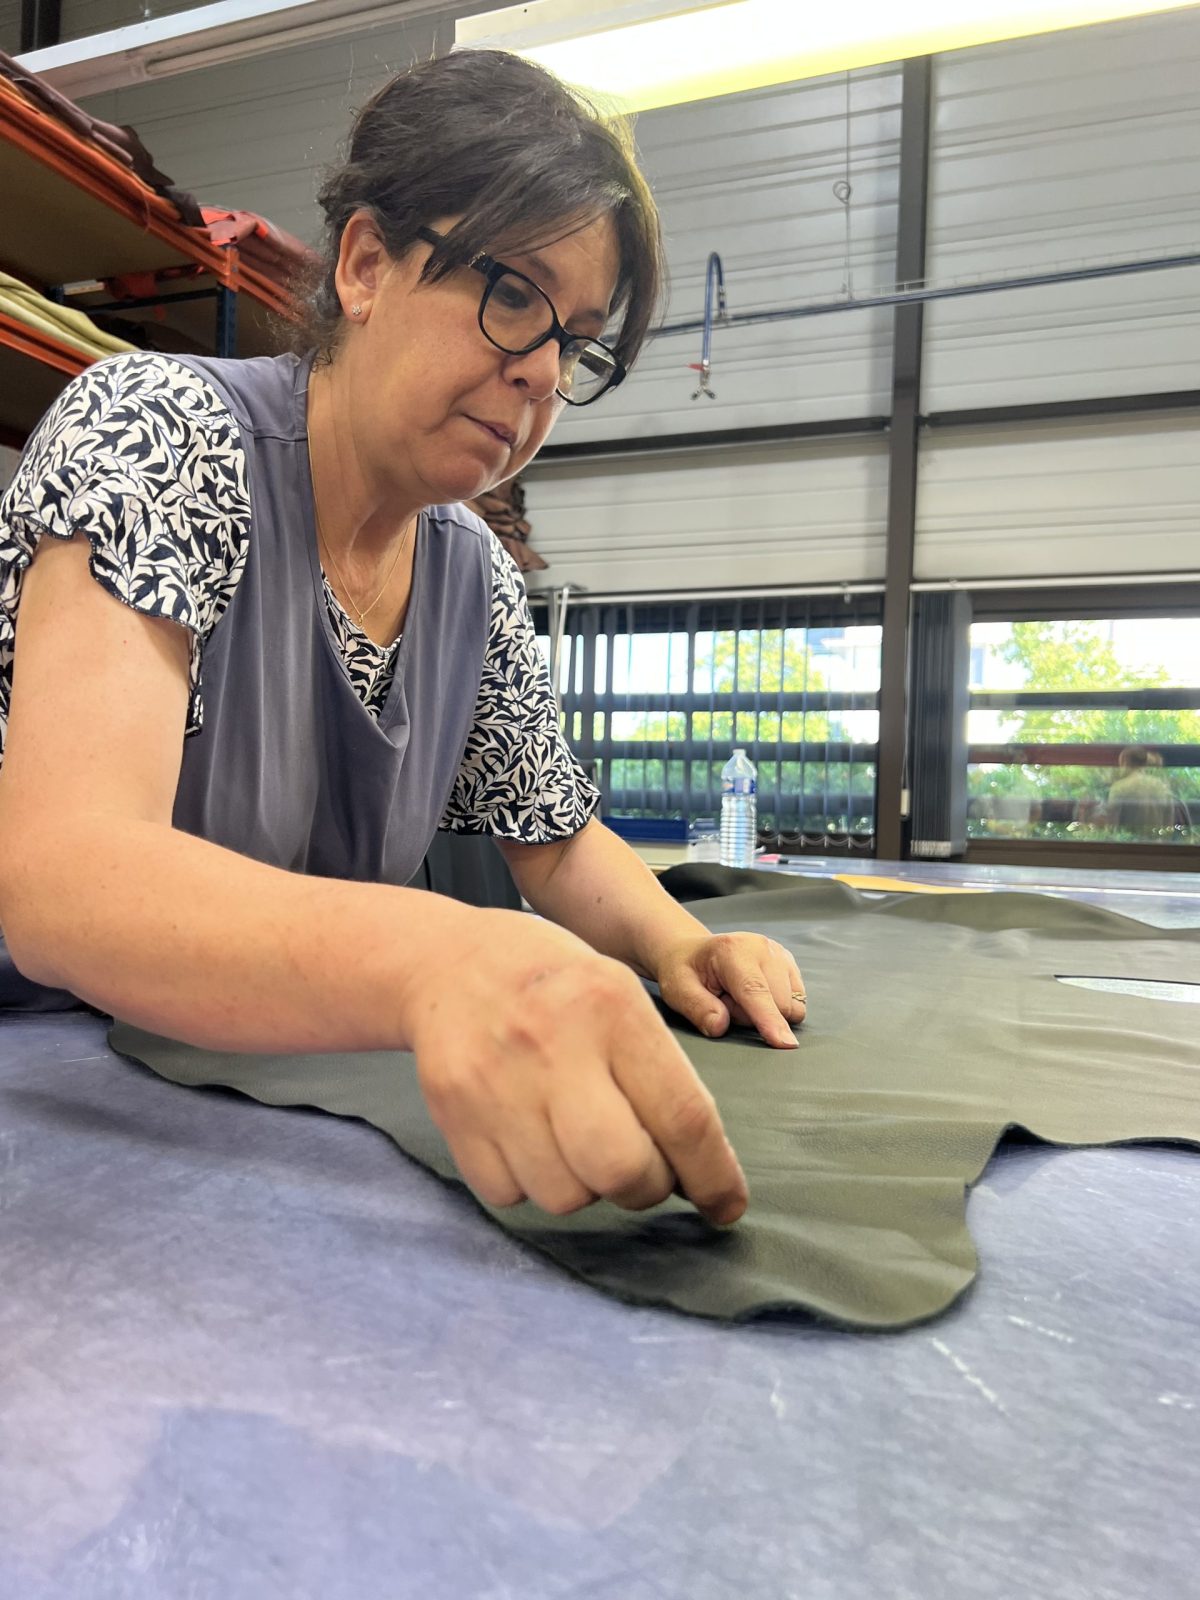 A stitcher at work. She analyzes the leather for perfection.